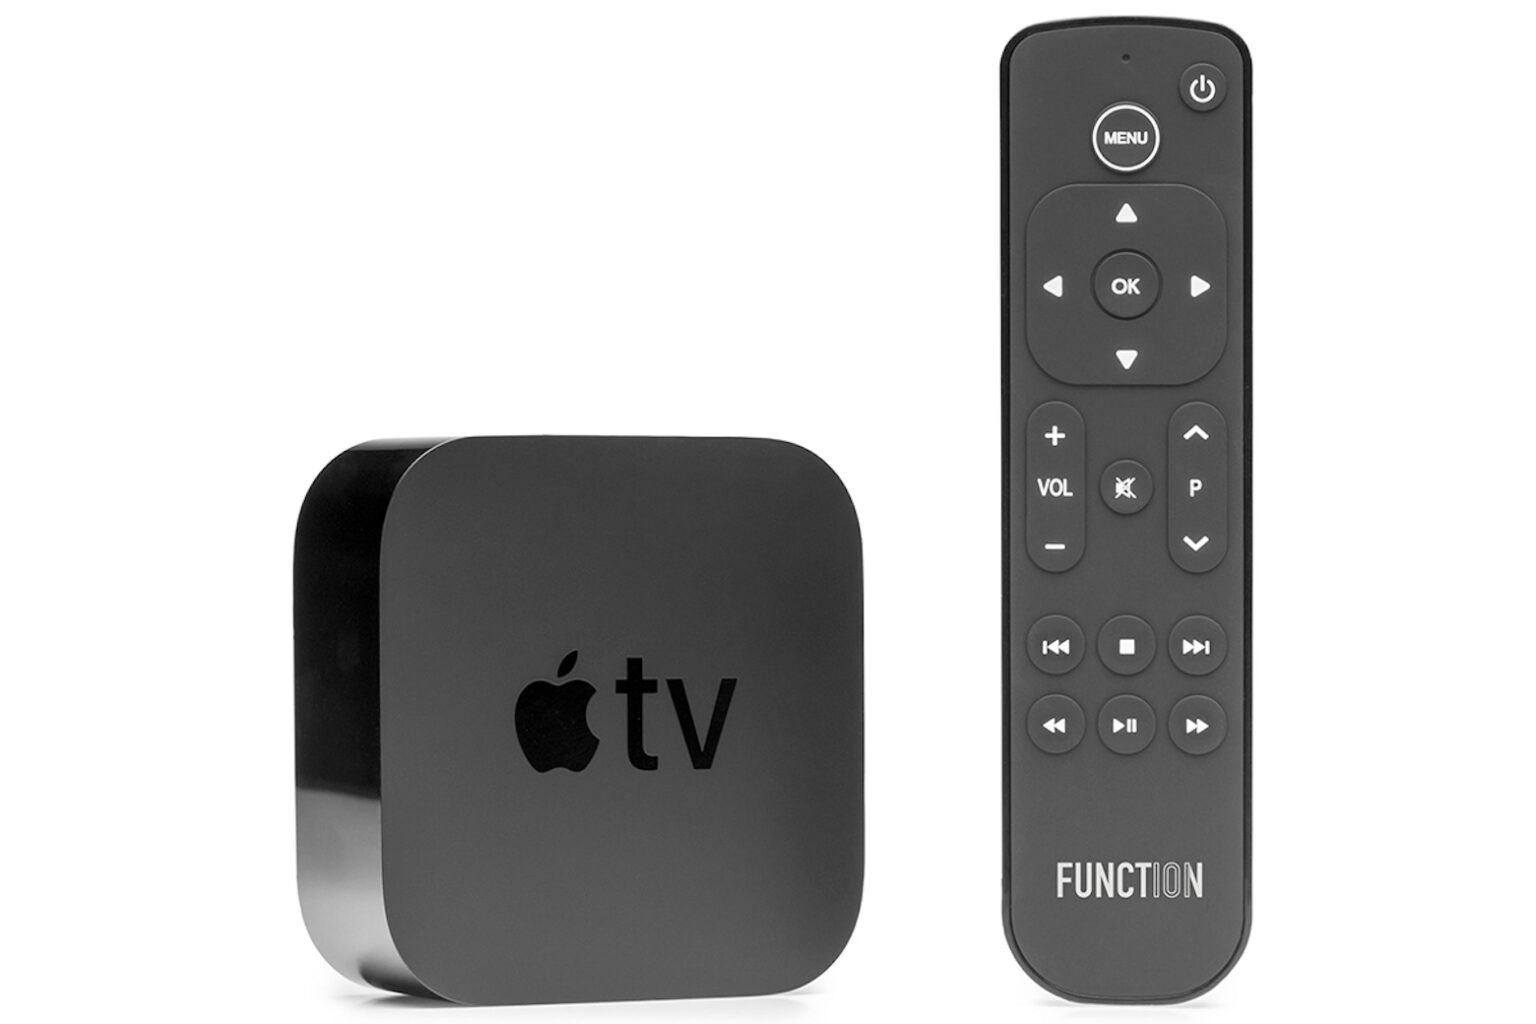 Grab an Apple TV replacement remote that doesn't require a conversation to change the channel